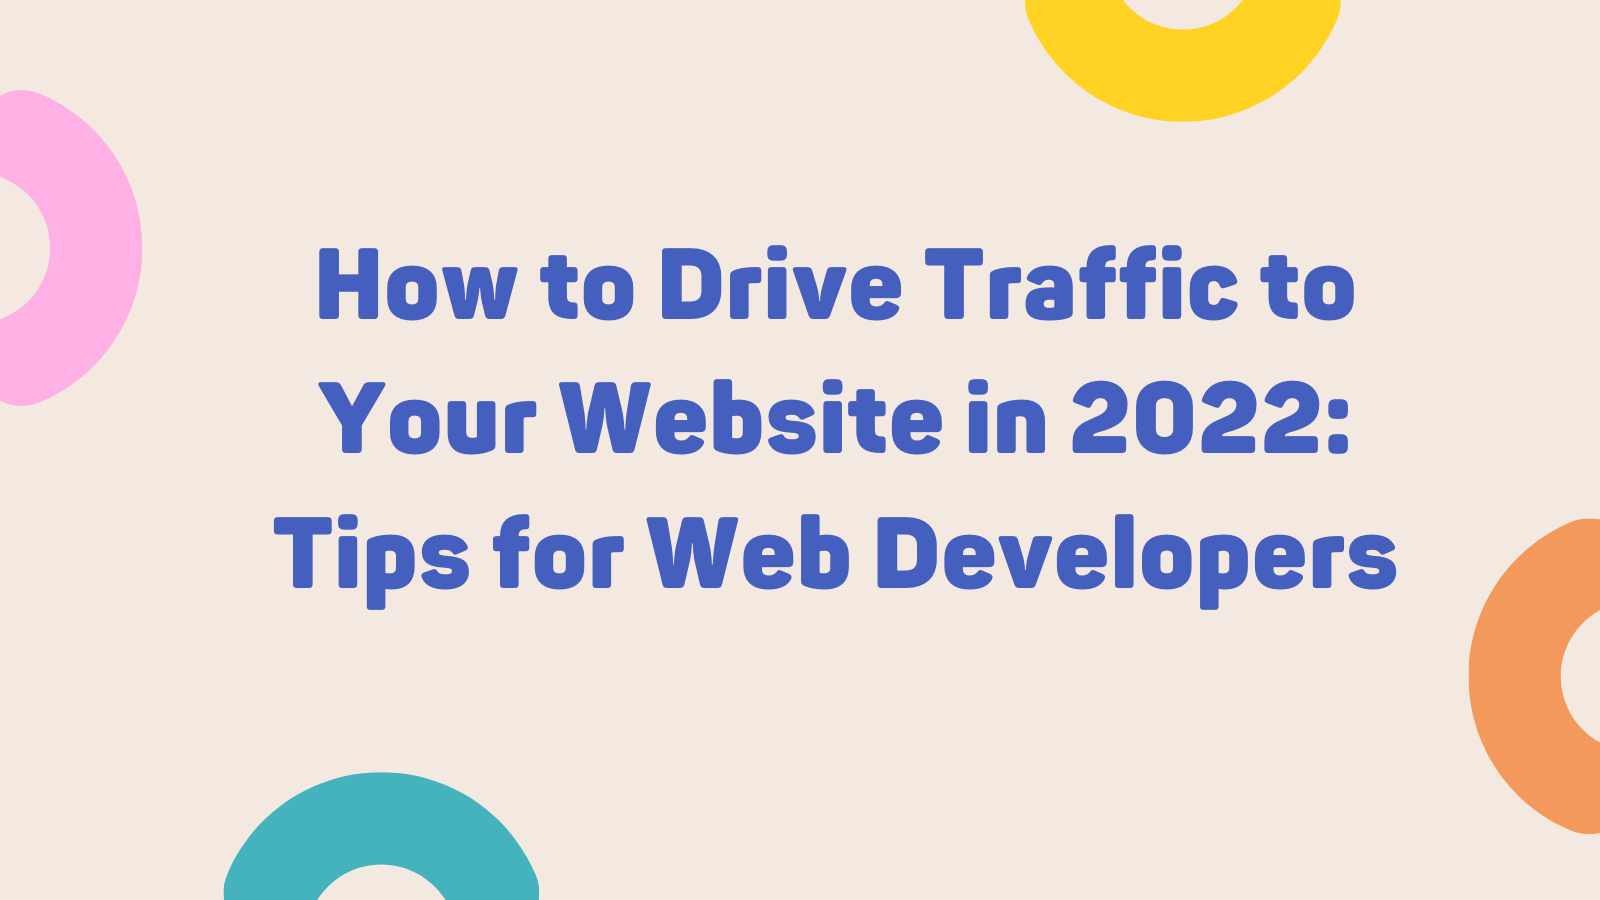 How to Drive Traffic to Your Website in 2022: Tips for Web Developers